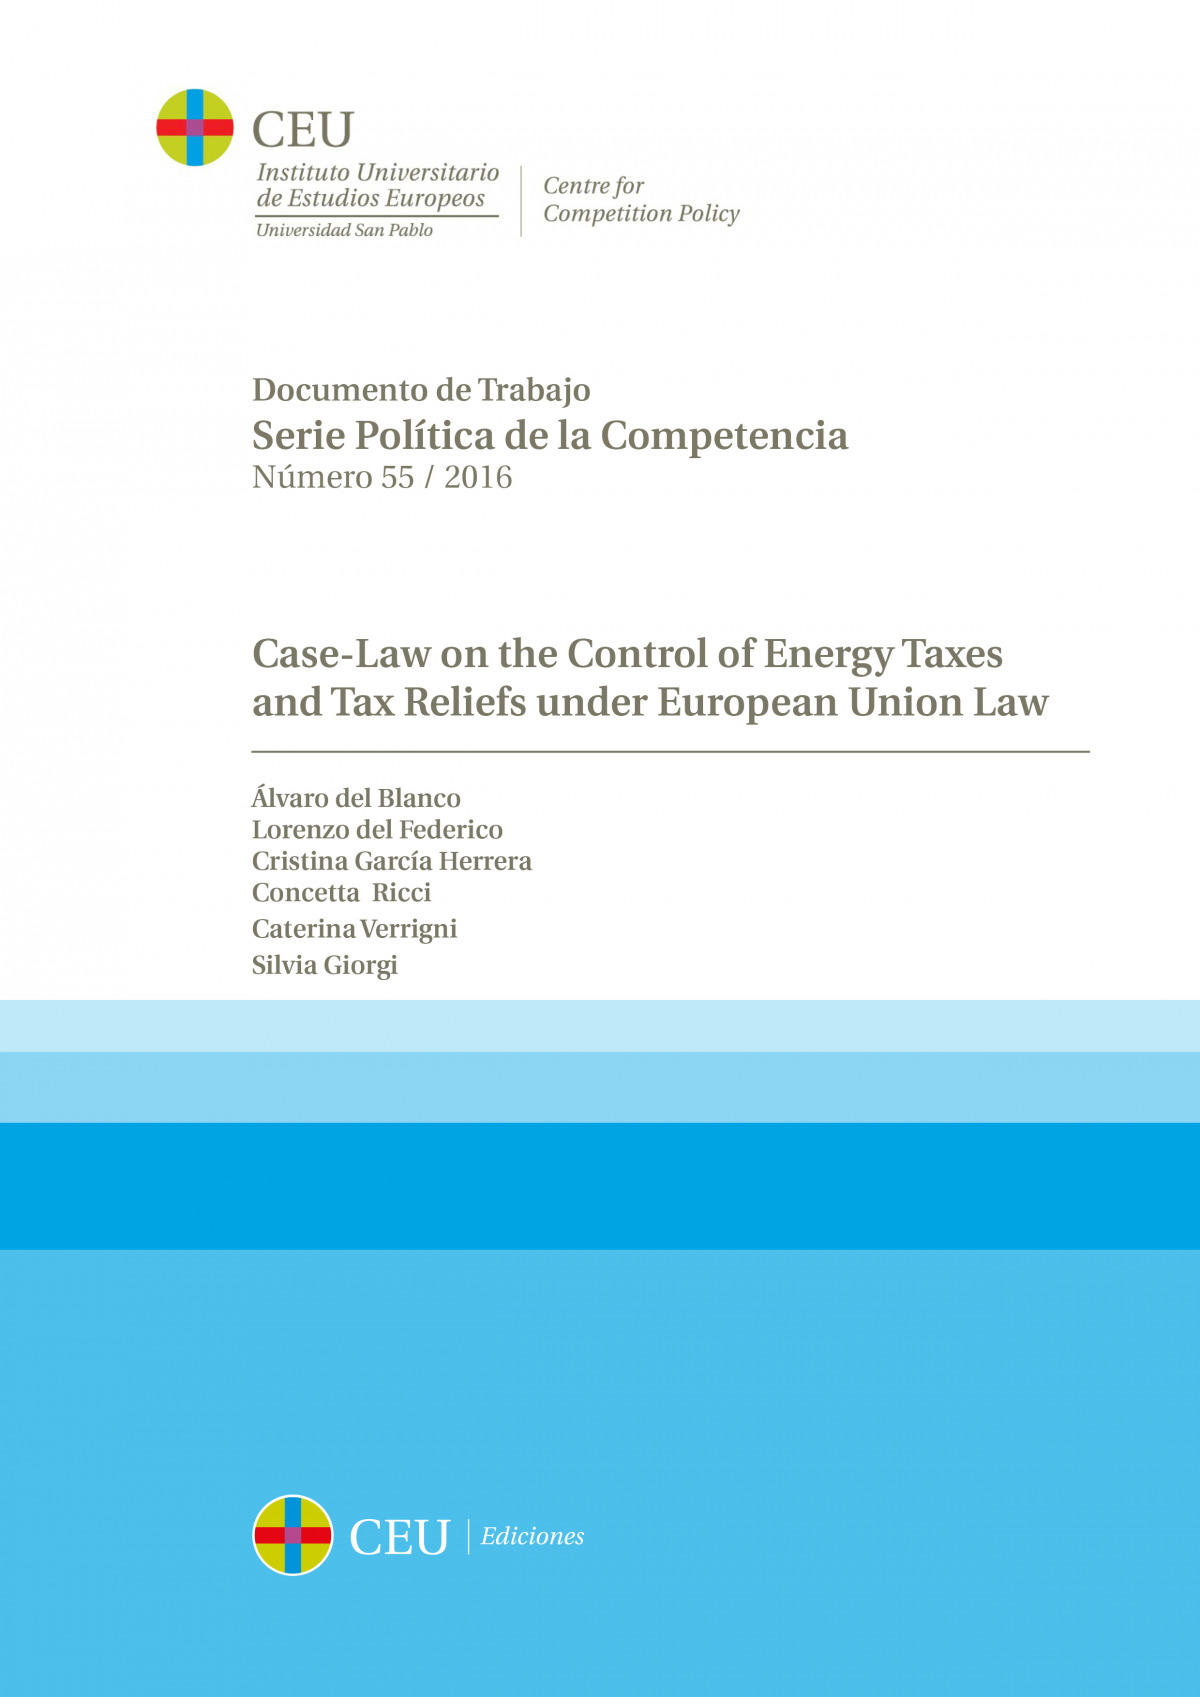 Case-Law on the control of energy taxes and tax reliefs under European